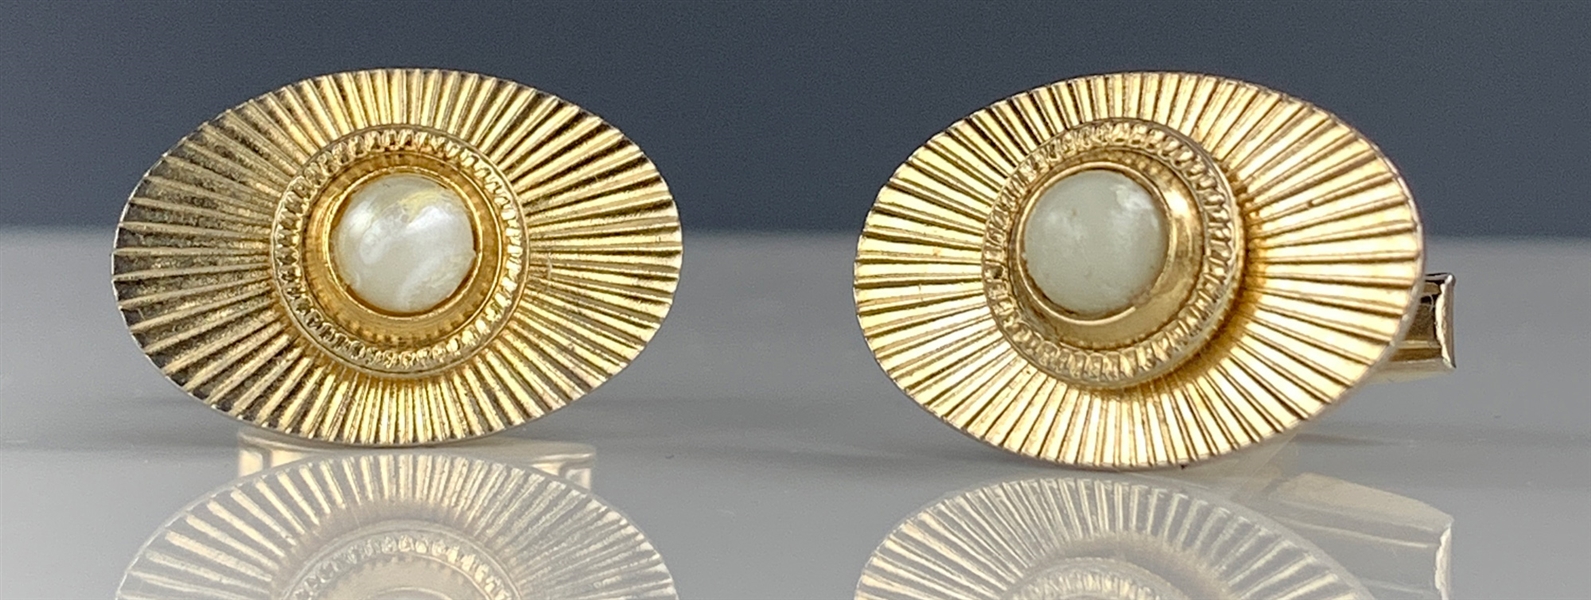 Elvis Presley Owned Pearl Cufflinks - Given to His Cousin Patsy Presley